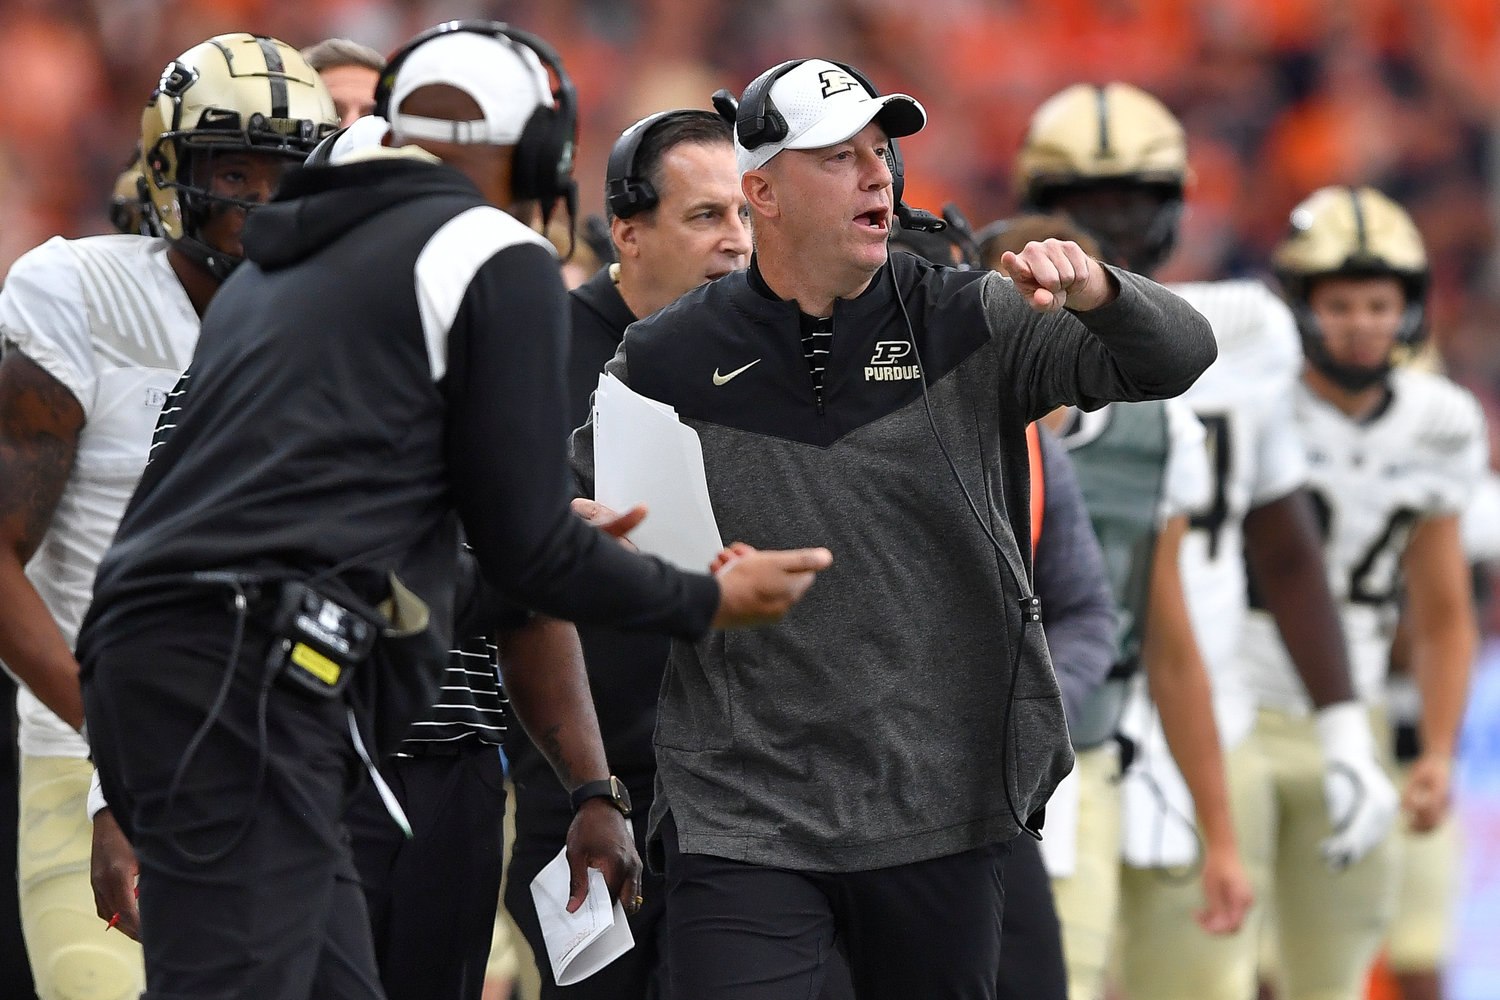 Purdue head coach Jeff Brohm, center, calls a play during the first half of an NCAA college football game against Syracuse in Syracuse, N.Y., Saturday, Sept. 17, 2022.